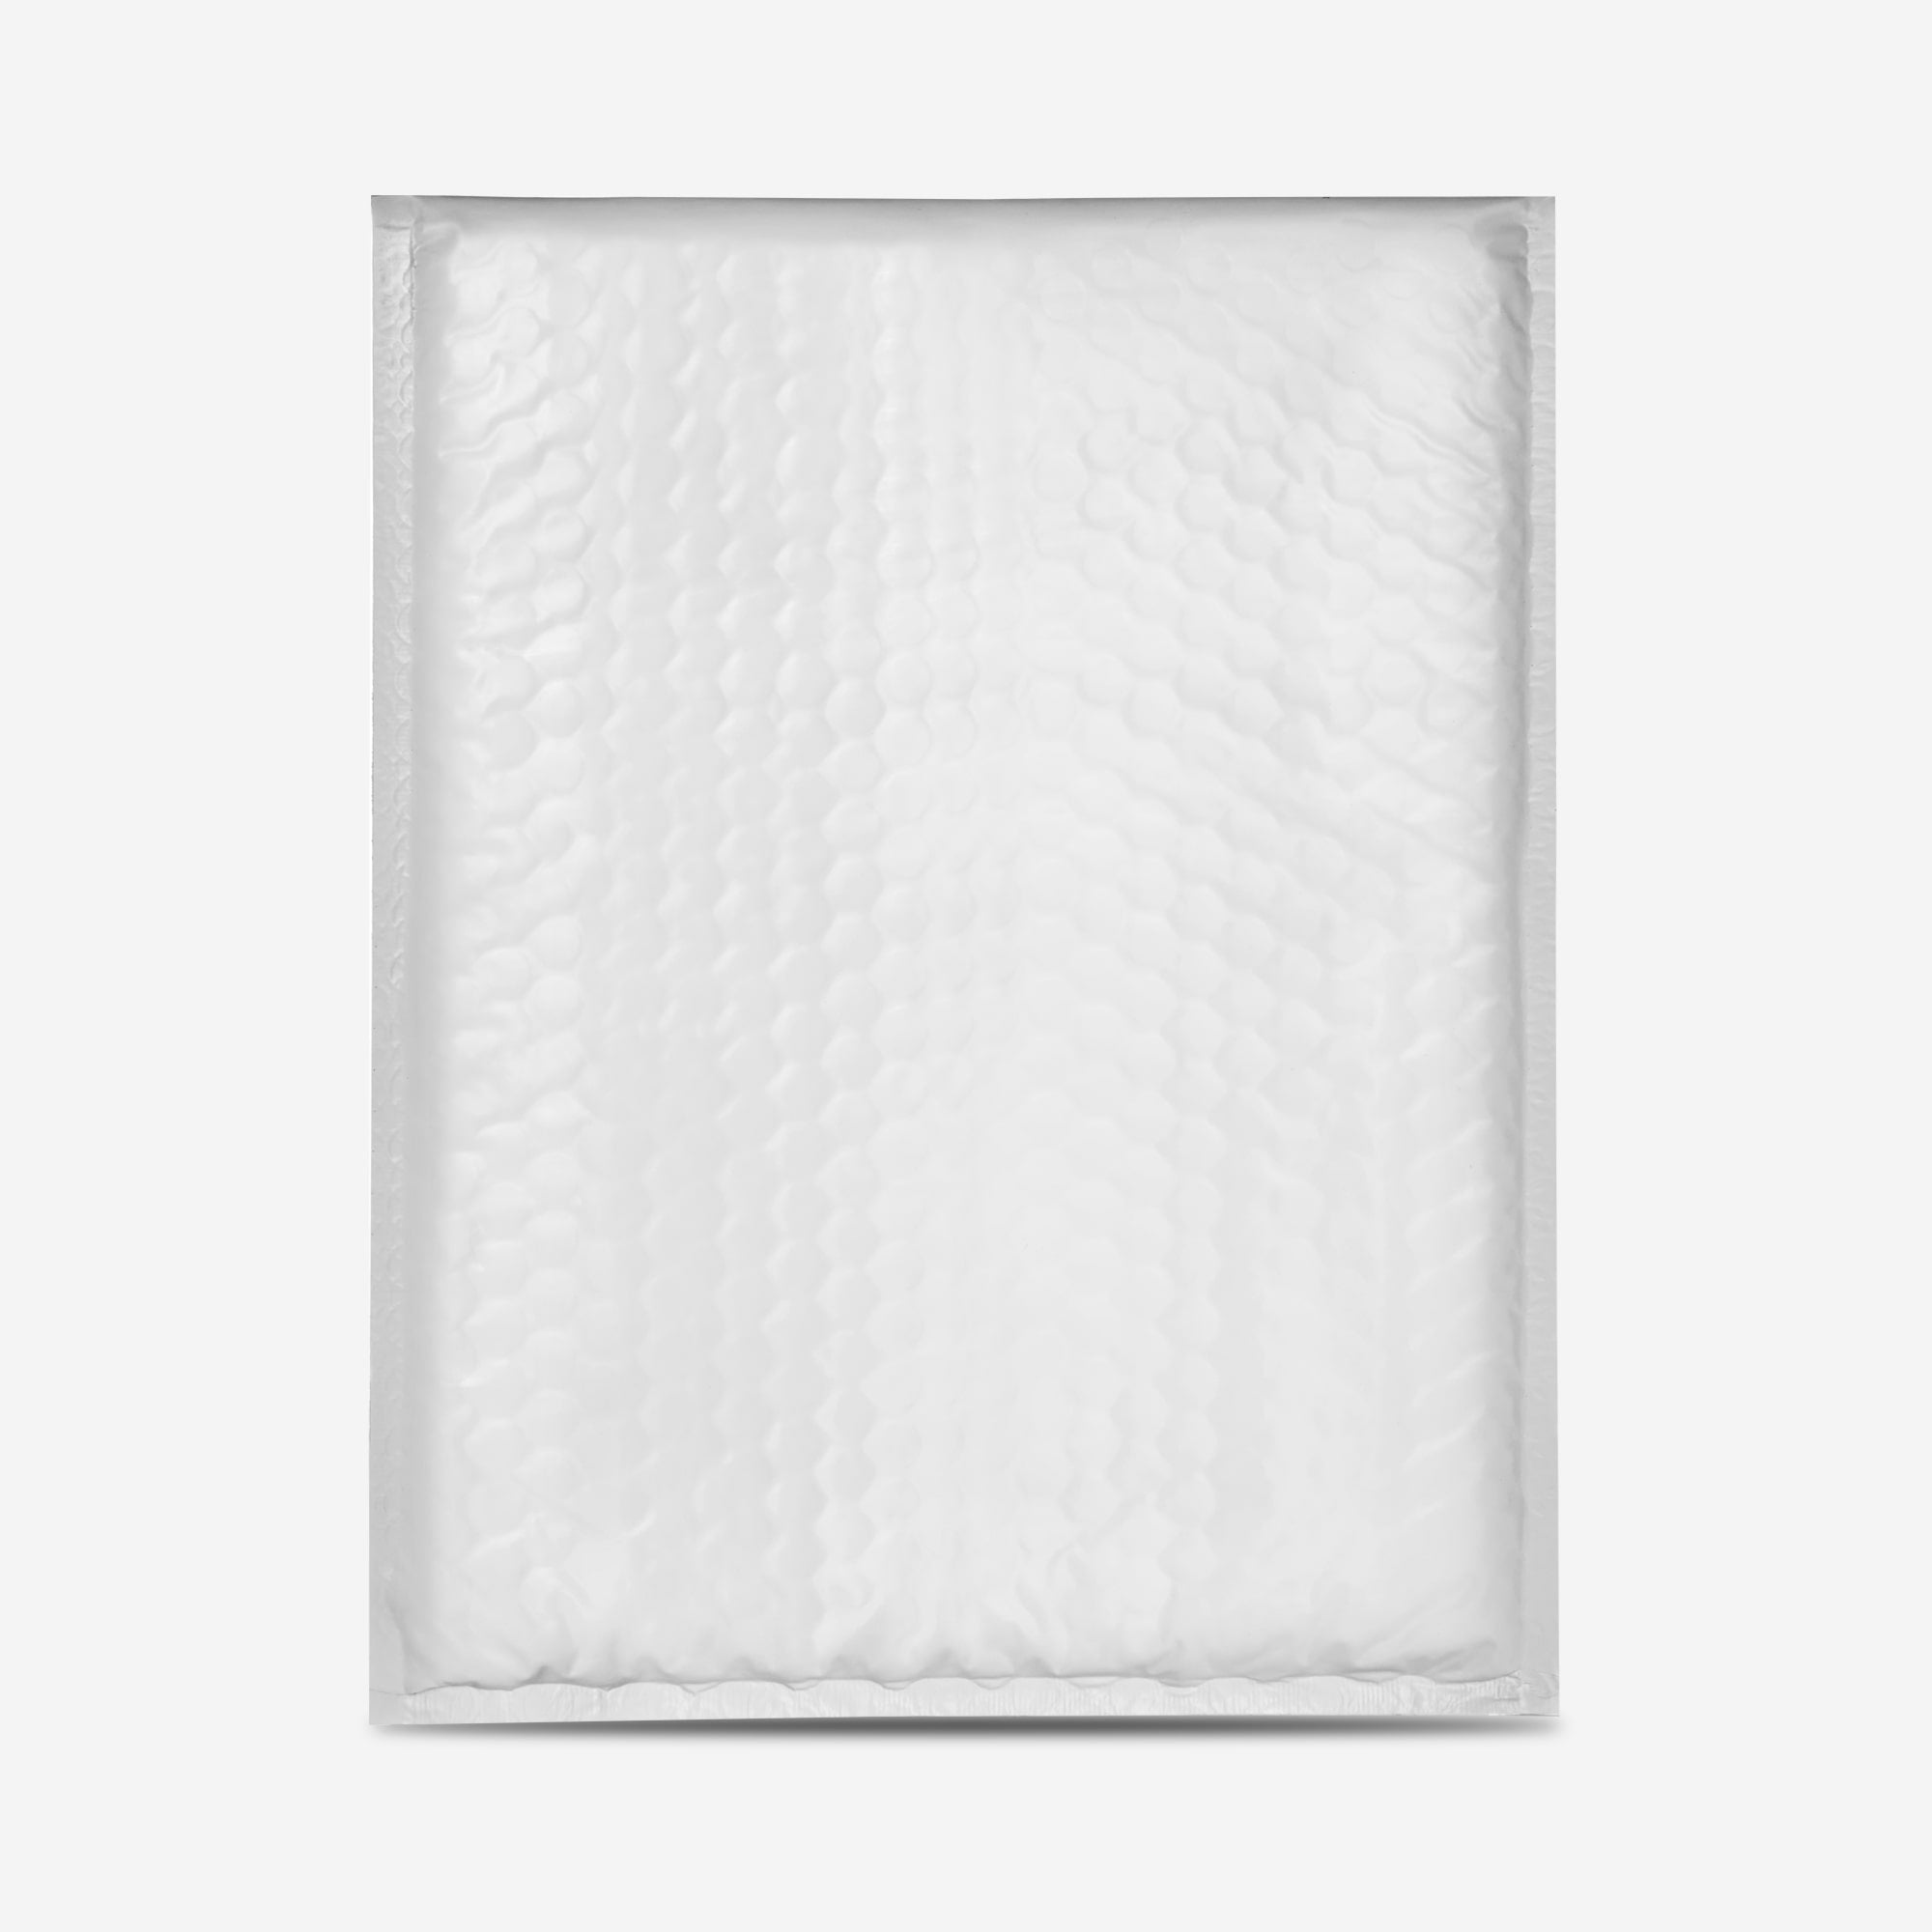 Poly bubble mailer #000 4 x 8 inches, 500 pcs per casePoly bubble mailer #000 4 x 8 inches, 500 pcs per case